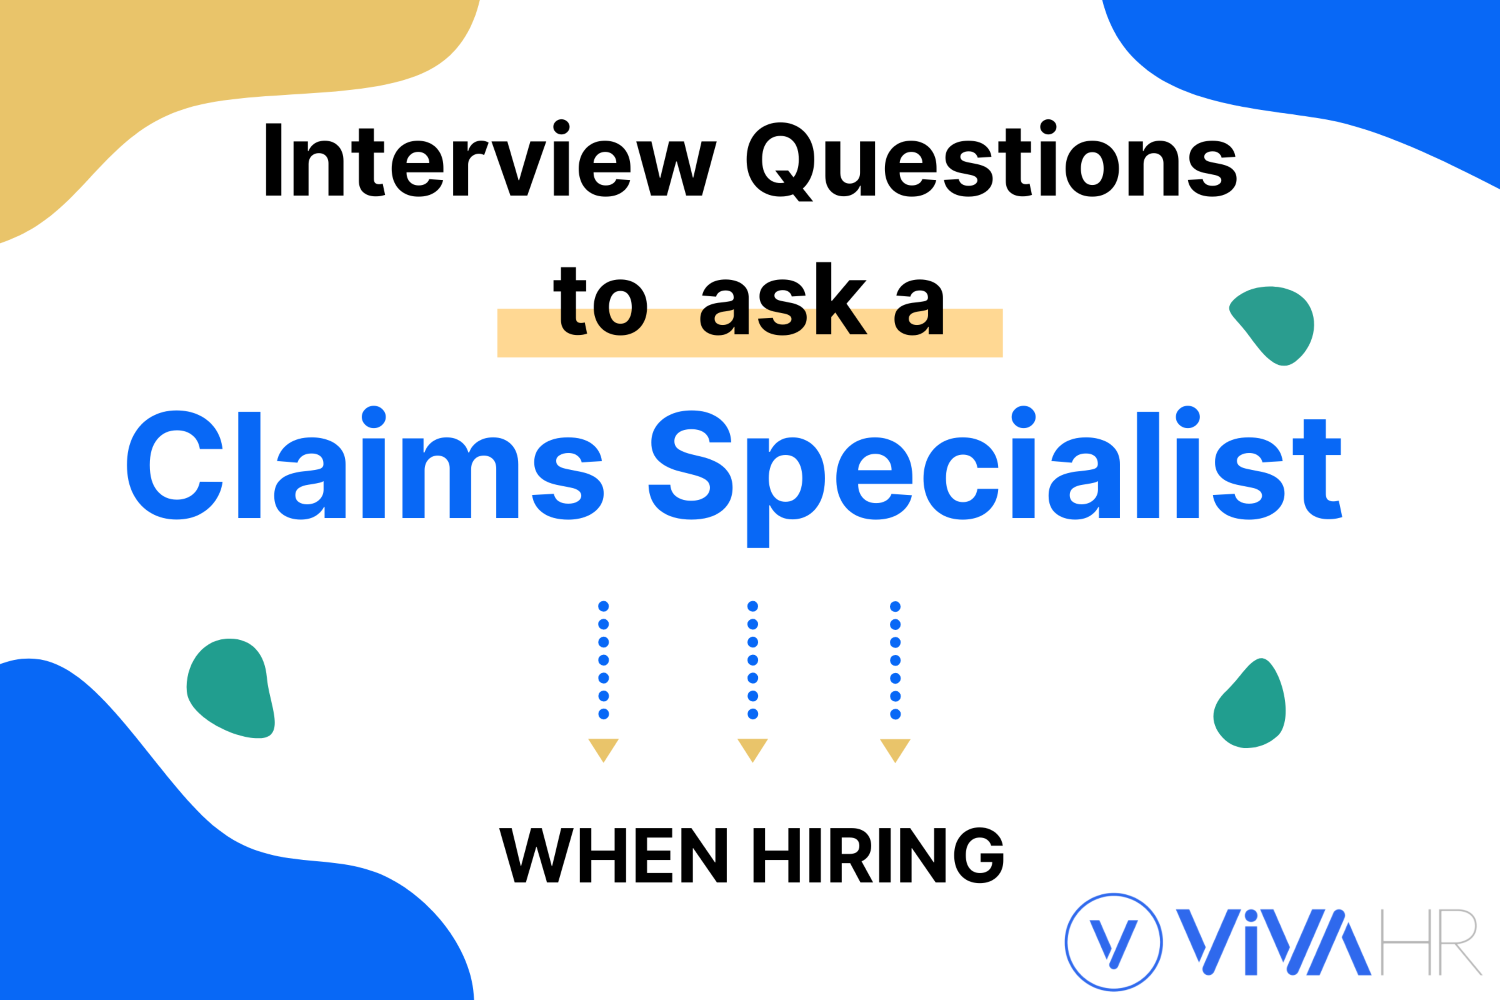 Claims Specialist Interview Questions